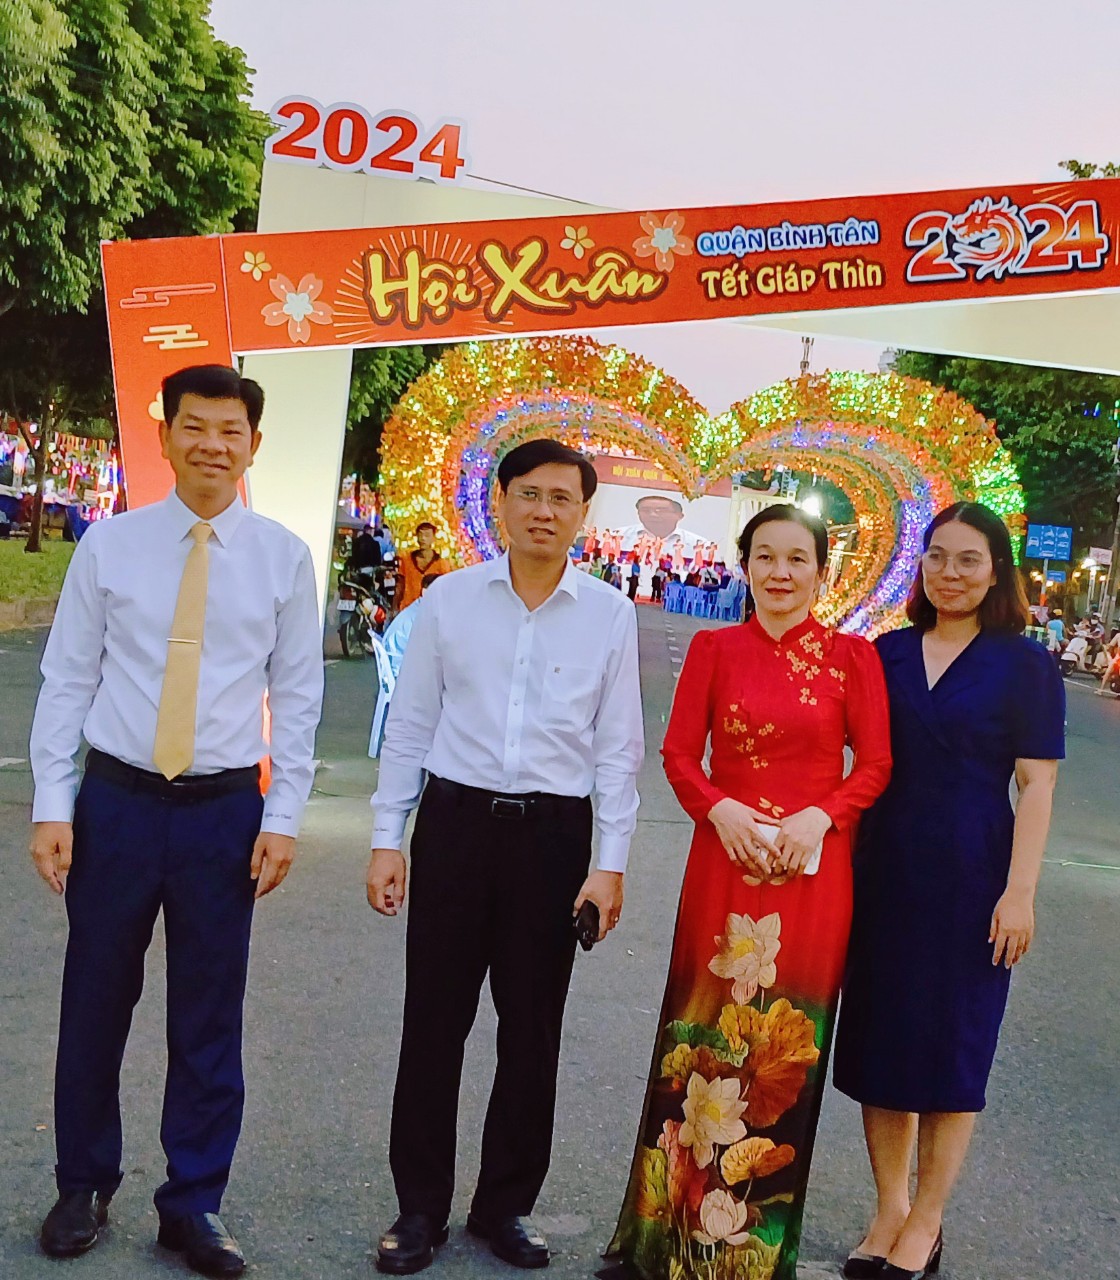 Mr Nguyen Minh Nhut - Chairman of Binh Tan District People’s Committee, along with district leaders and businesses, visits the exhibition booth at the opening ceremony. Photo Bich Lien